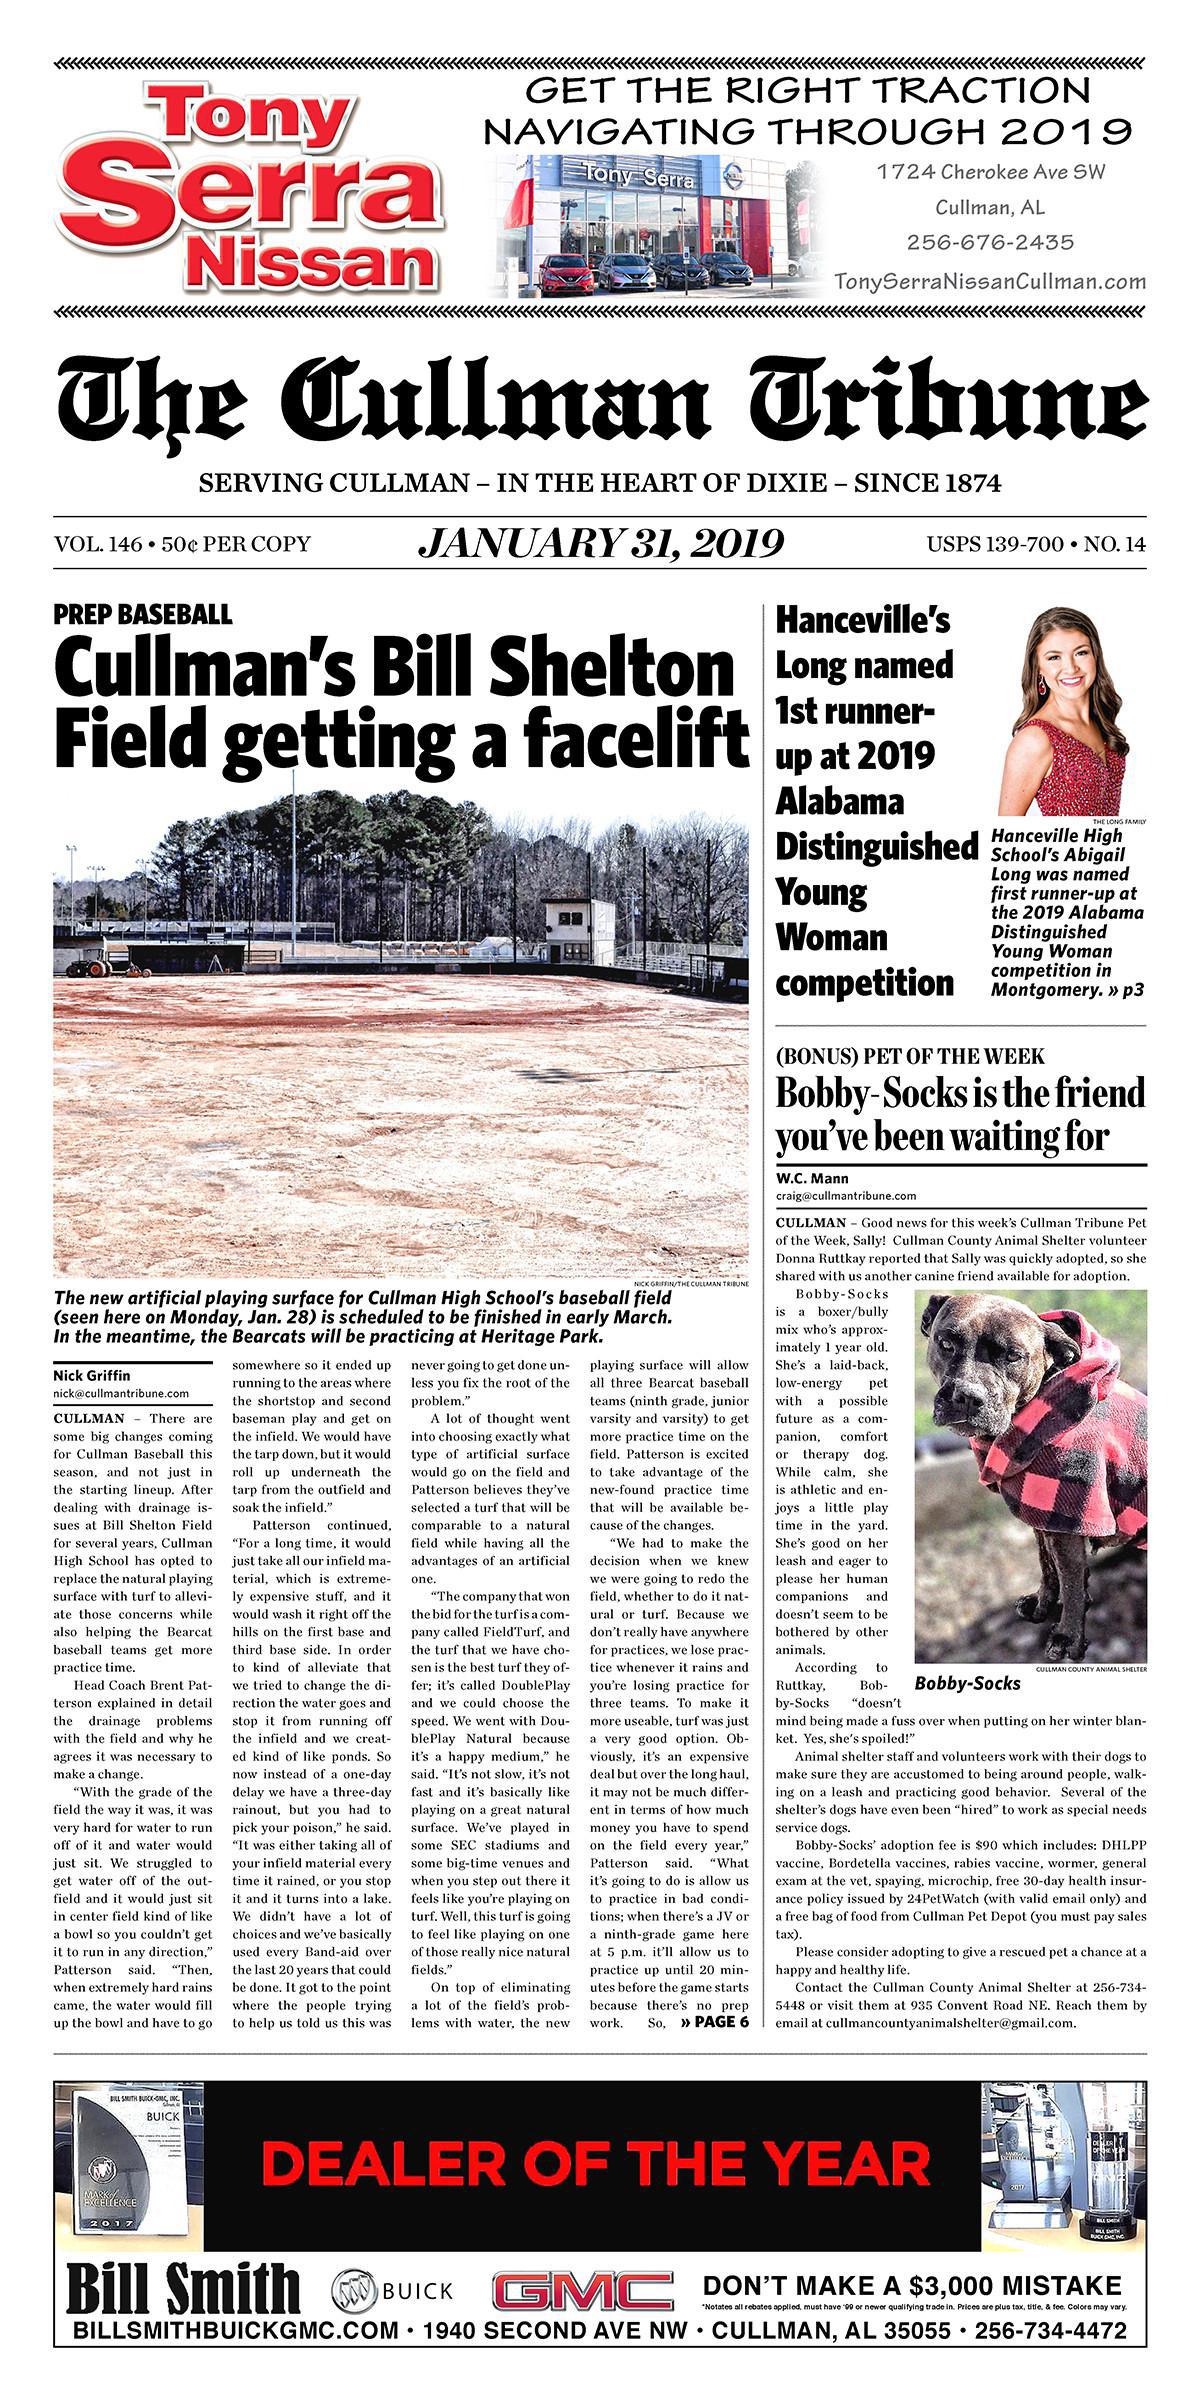 Good Morning Cullman! The 01-31-2019 edition of the Cullman Tribune is now ready to view